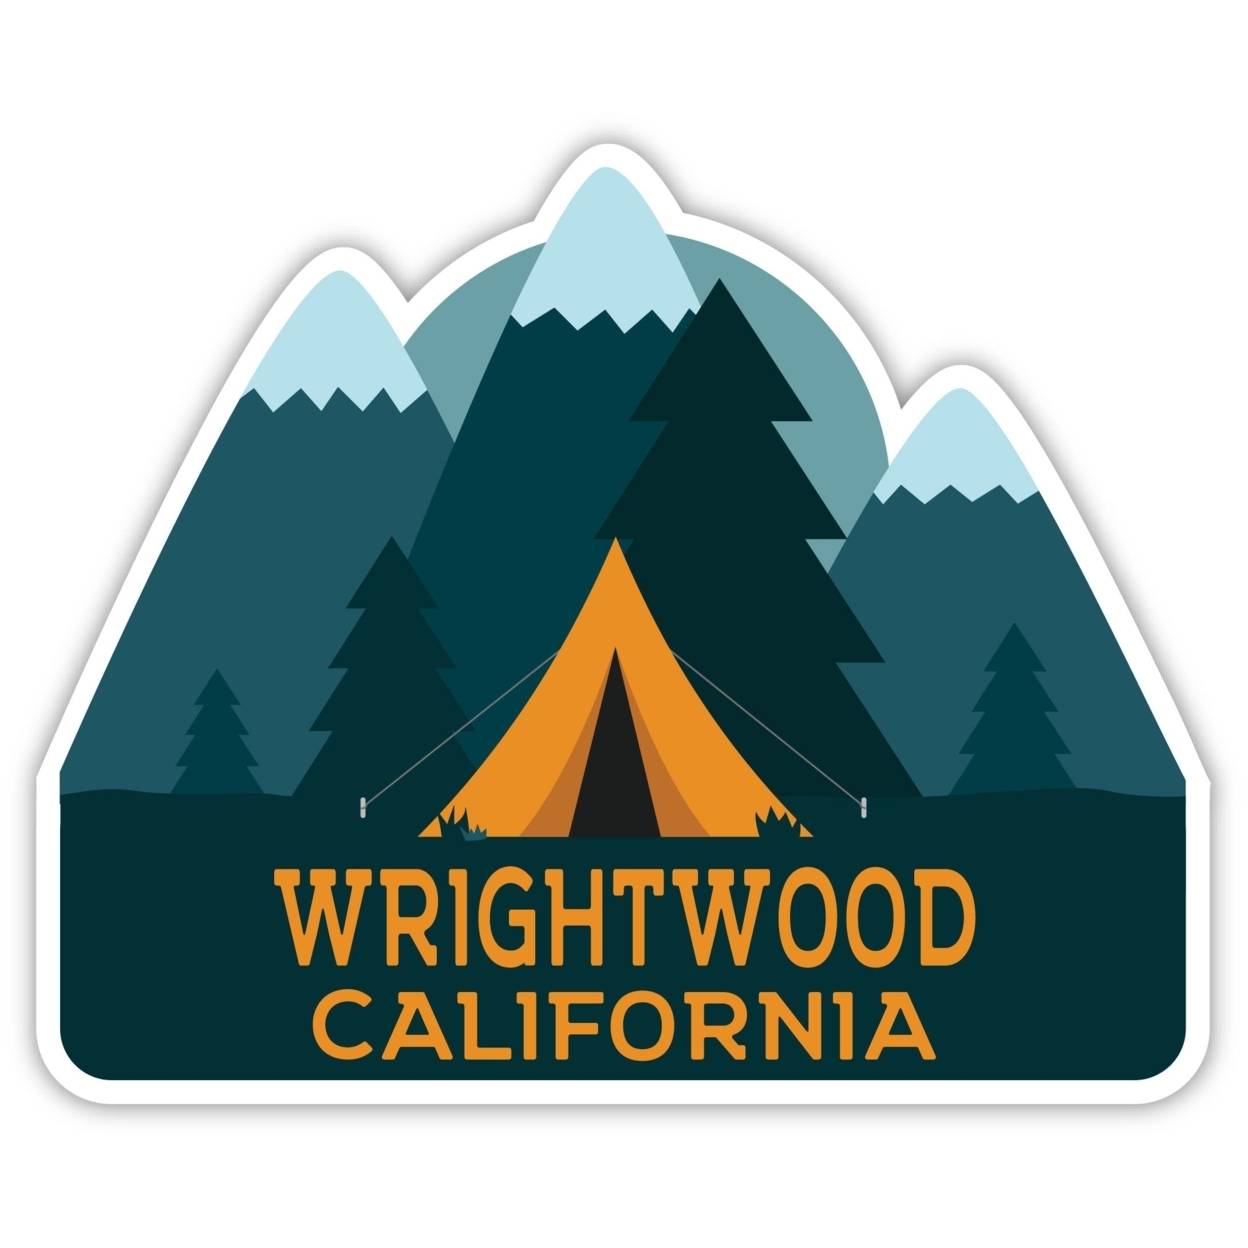 Wrightwood California Souvenir Decorative Stickers (Choose Theme And Size) - Single Unit, 2-Inch, Adventures Awaits